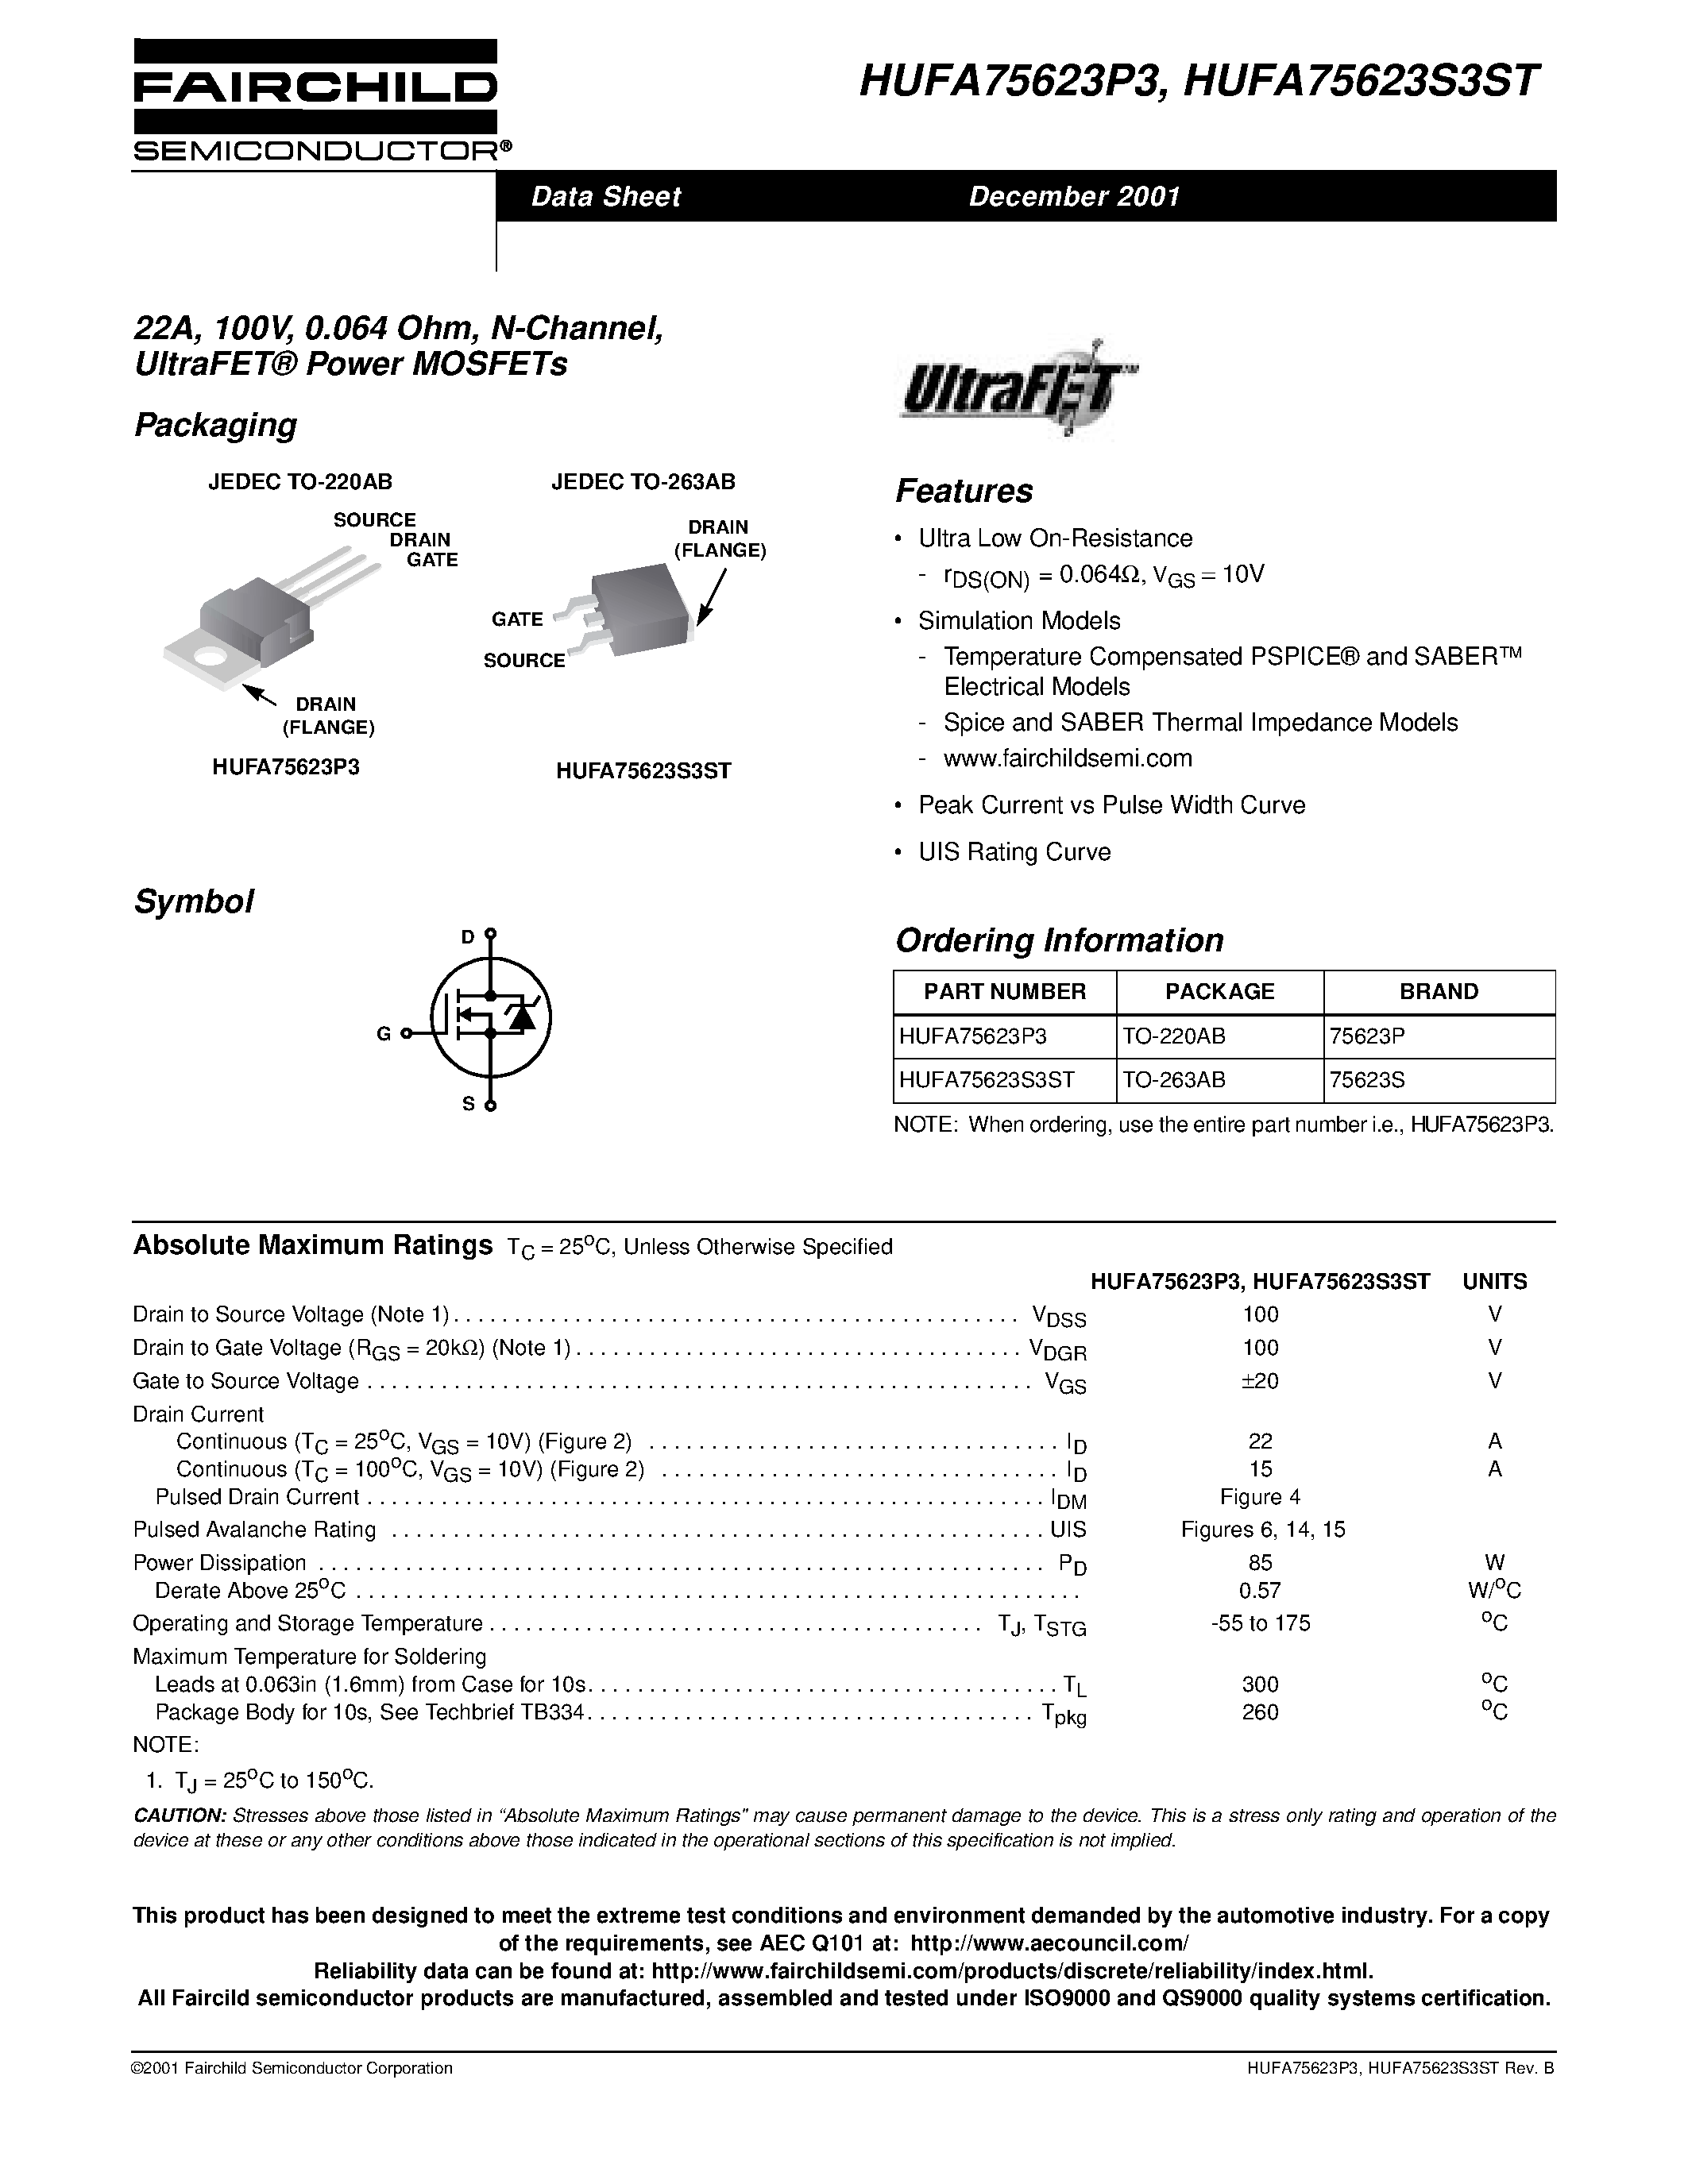 Datasheet HUFA75623P3 - 22A/ 100V/ 0.064 Ohm/ N-Channel/ UltraFET Power MOSFETs page 1